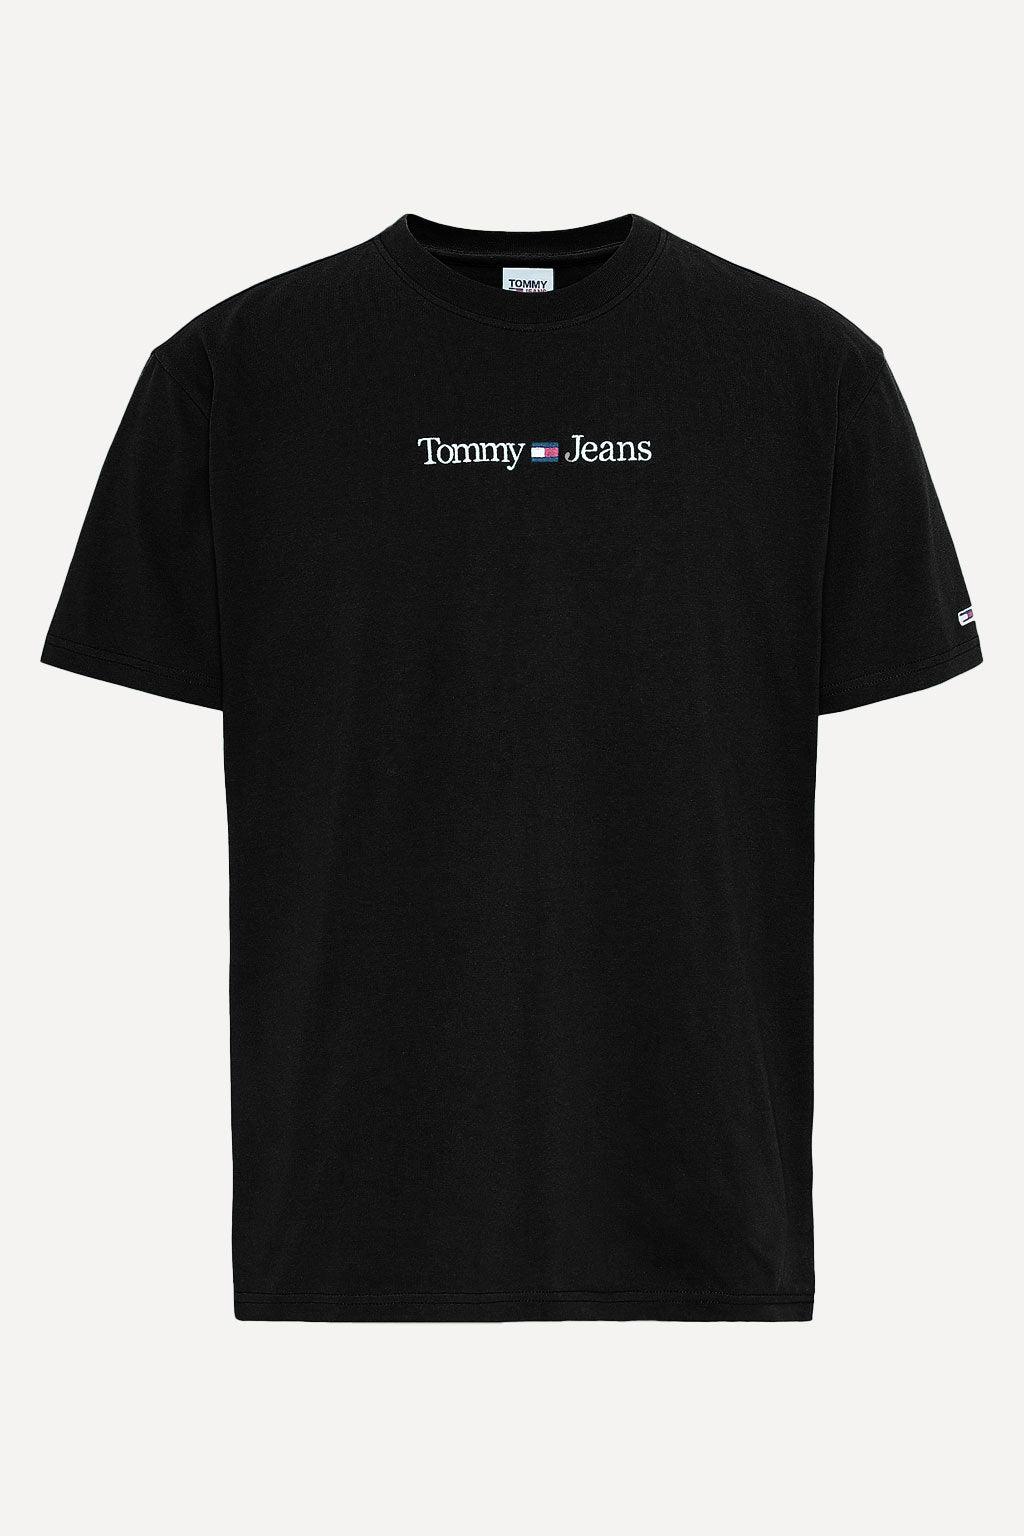 Tommy Jeans t-shirt | Big Boss | the menswear concept